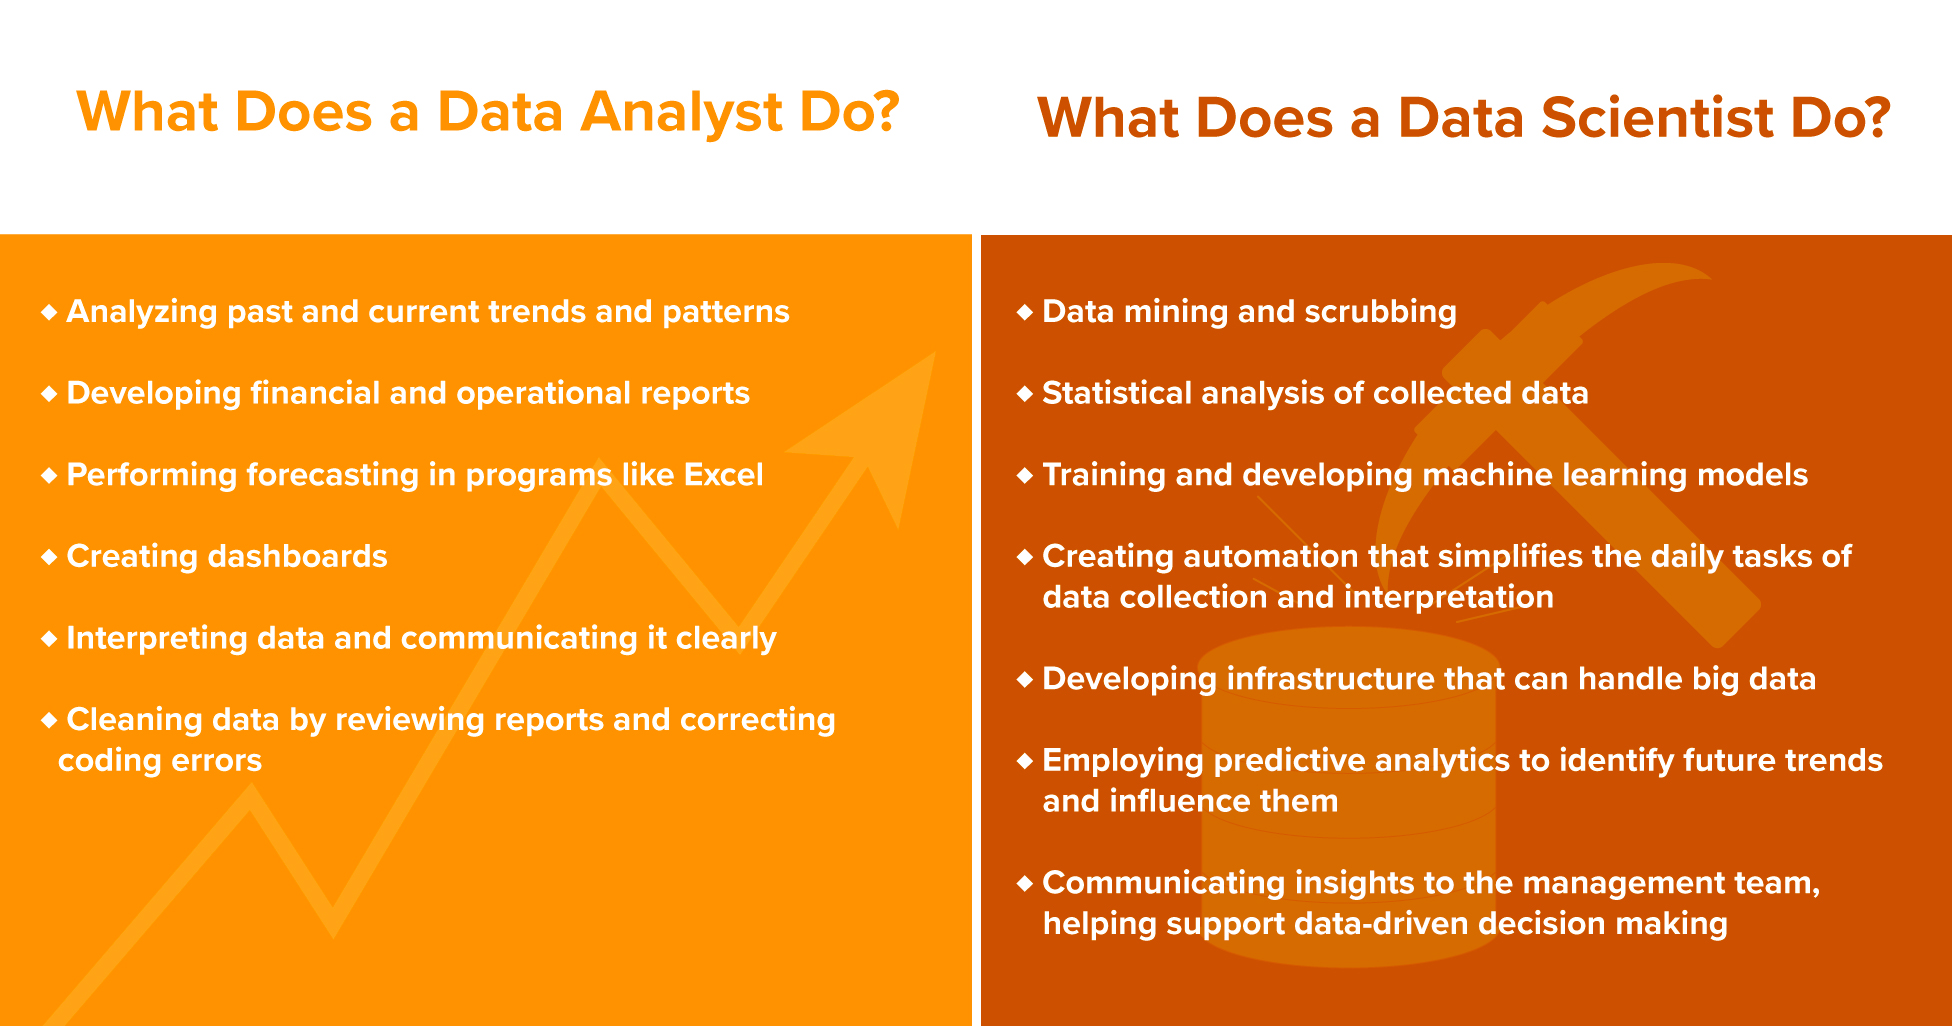 A graphic that illustrates the differences between what a data analyst and data scientist does.